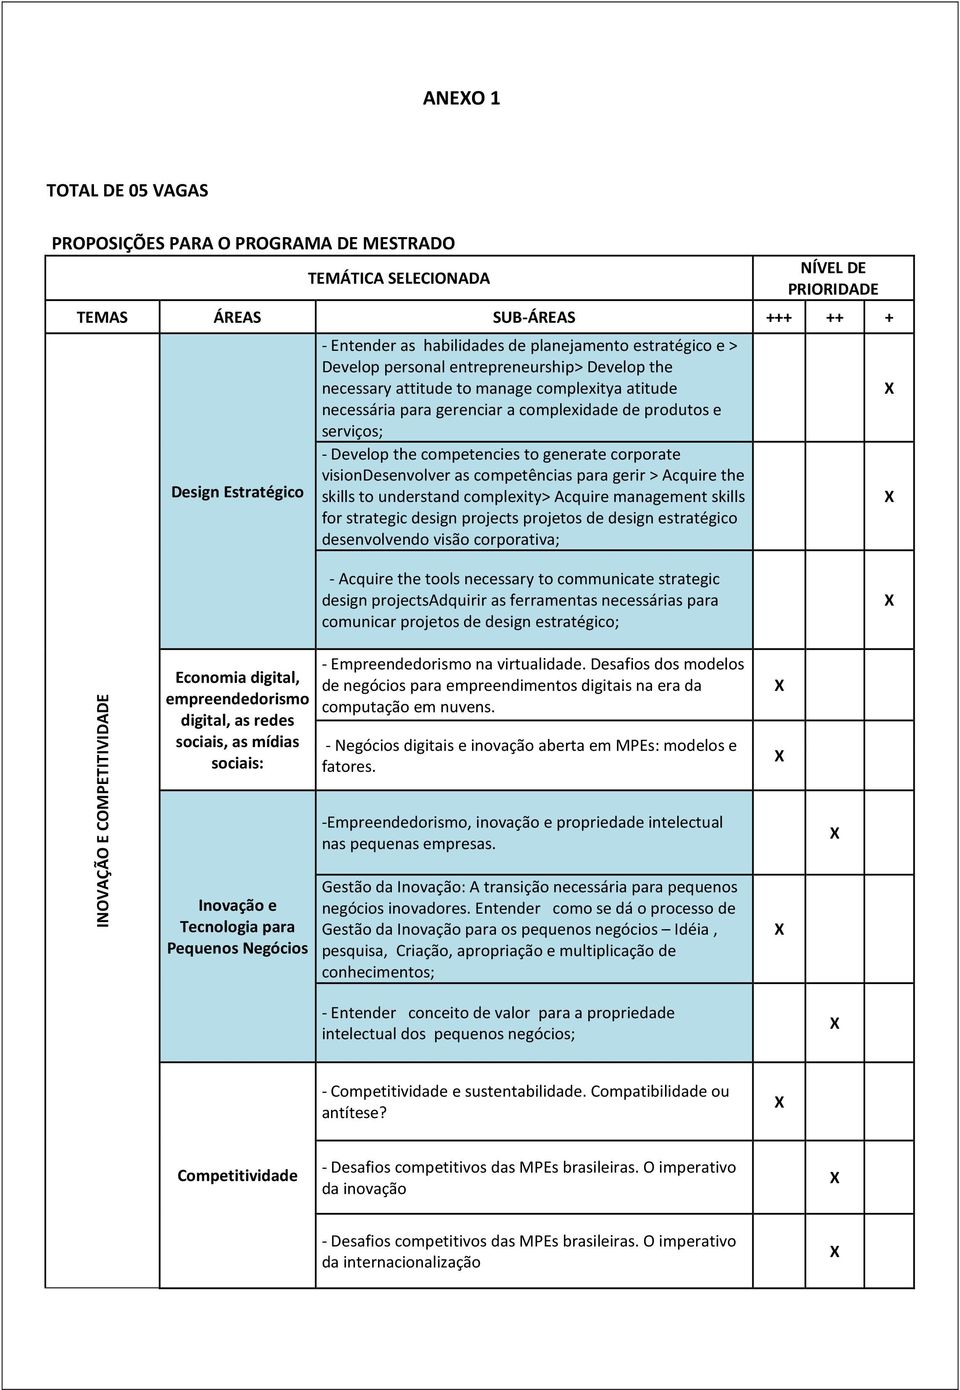 competencies to generate corporate visiondesenvolver as competências para gerir > Acquire the skills to understand complexity> Acquire management skills for strategic design projects projetos de